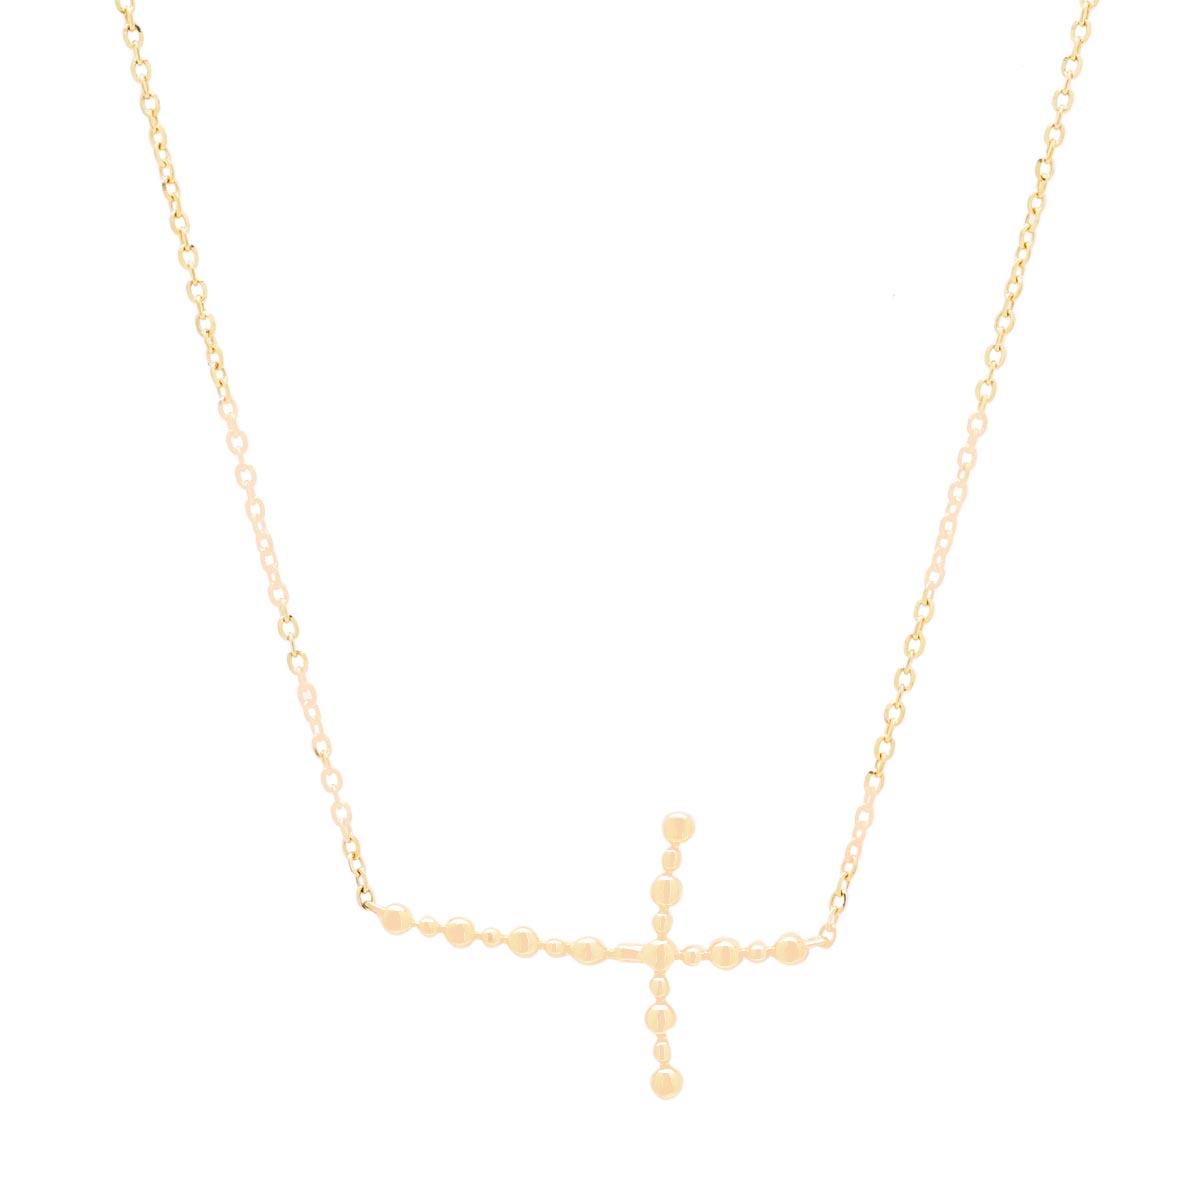 Beaded Cross Necklace in 18kt Yellow Gold